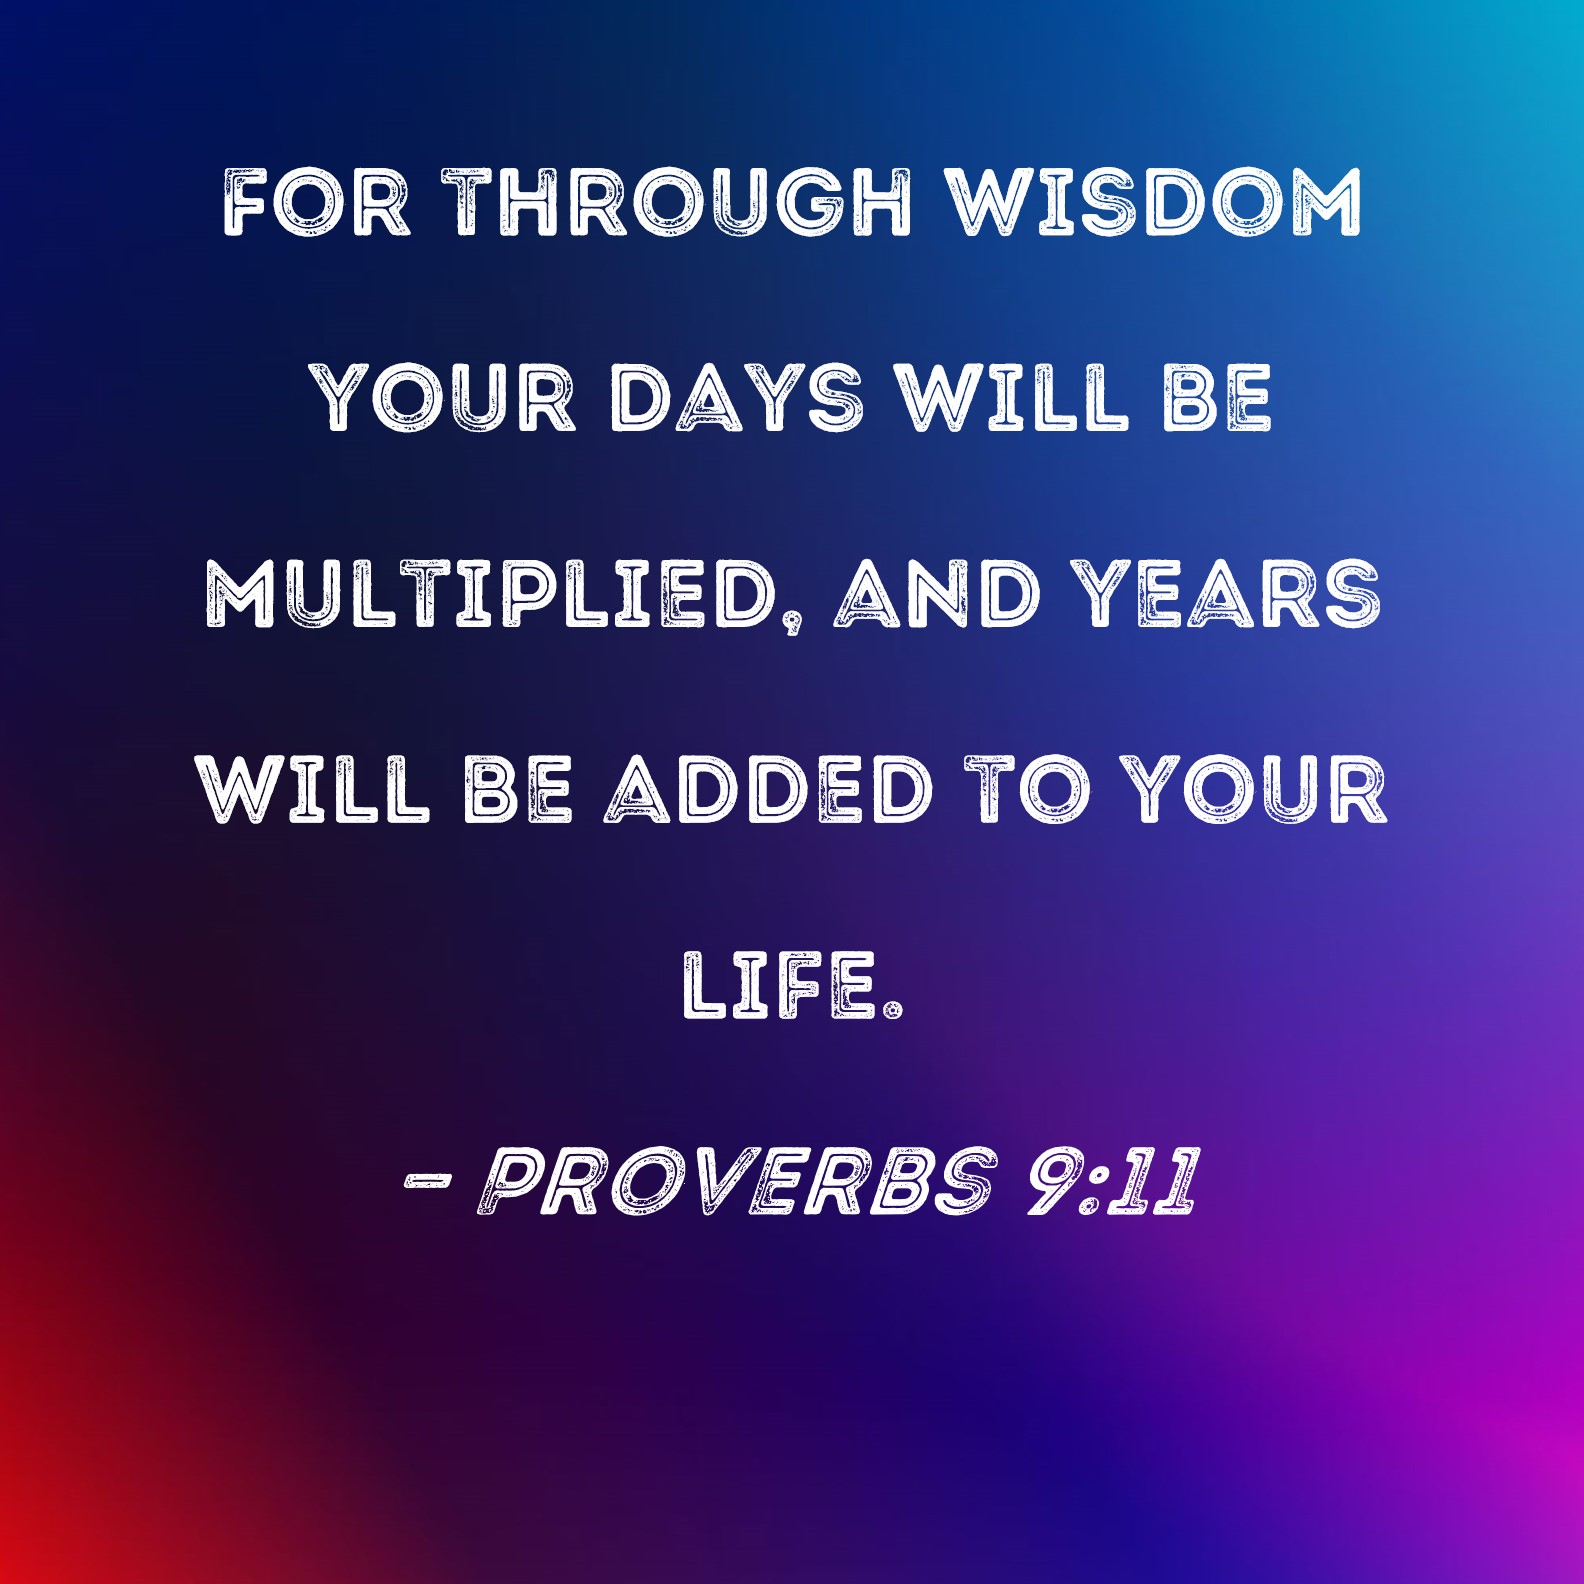 proverbs-9-11-for-through-wisdom-your-days-will-be-multiplied-and